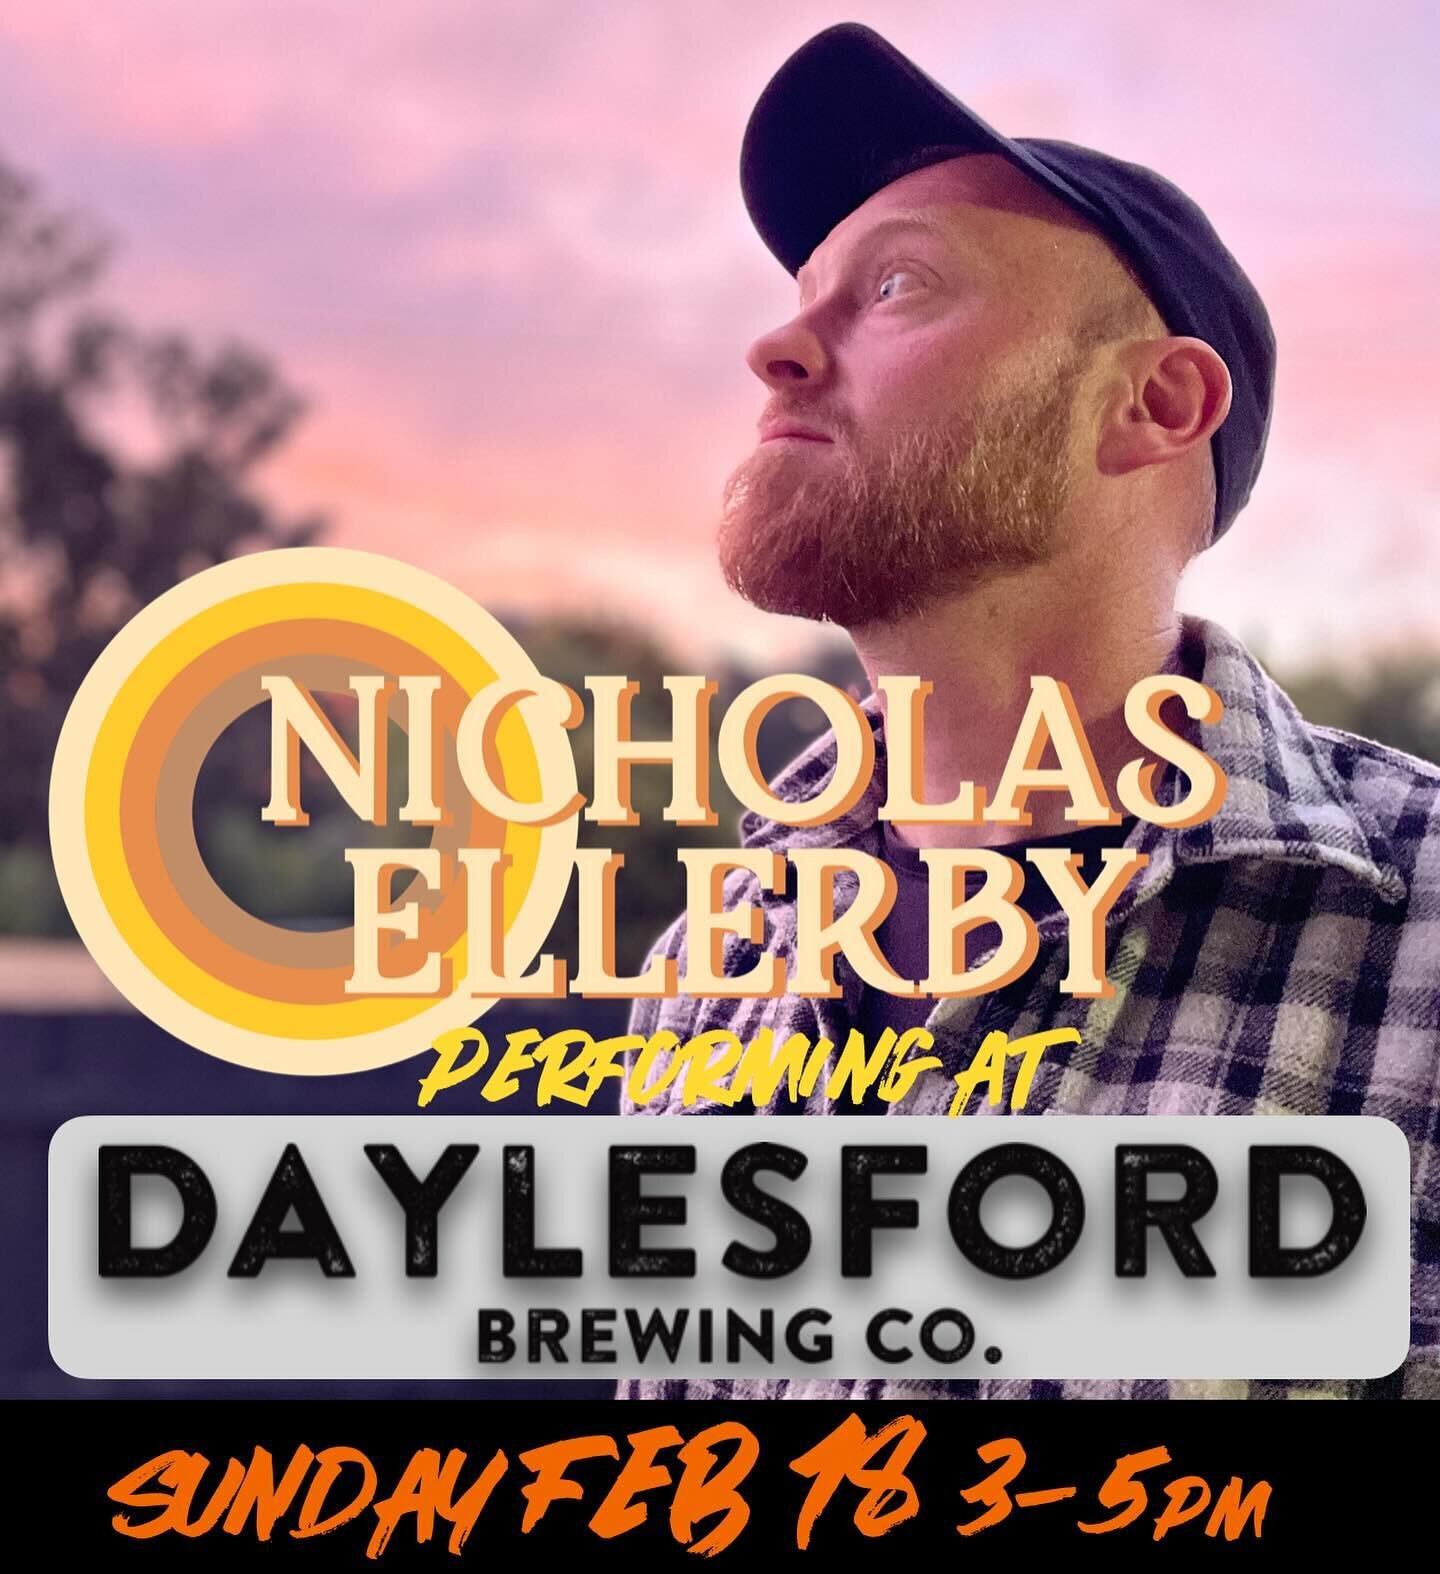 Really looking forward to another #sundaysession at @daylesfordbrewingco this Sunday! Got some new songs to try out for you too. Come have some fun in the sun 😎